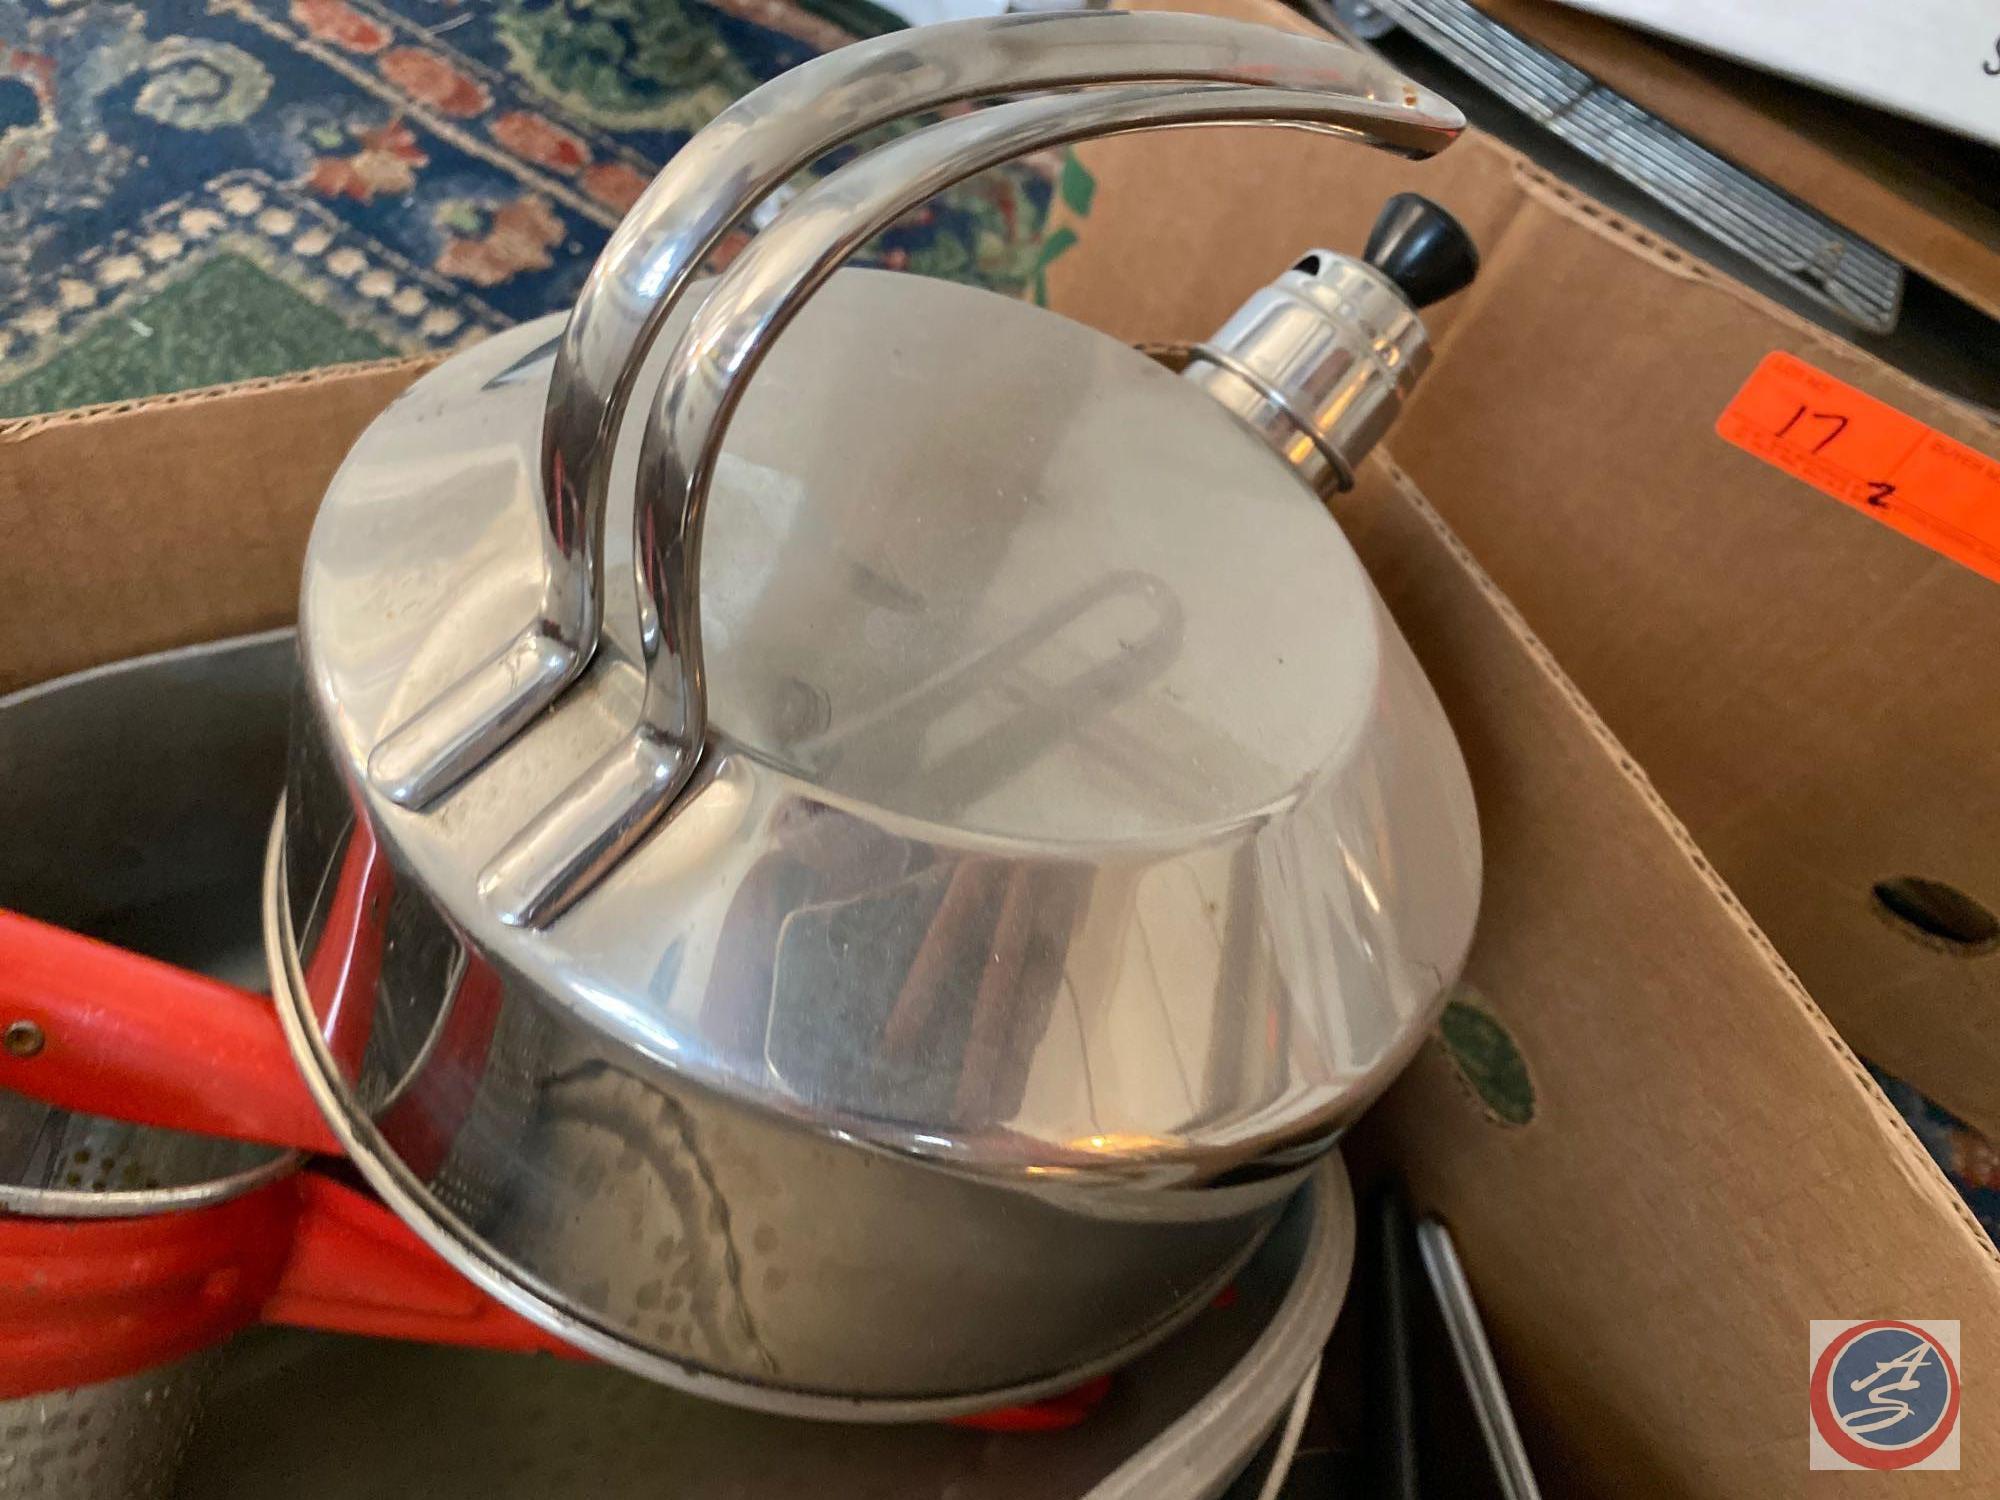 Revereware cooking pans with copper bottoms and lids